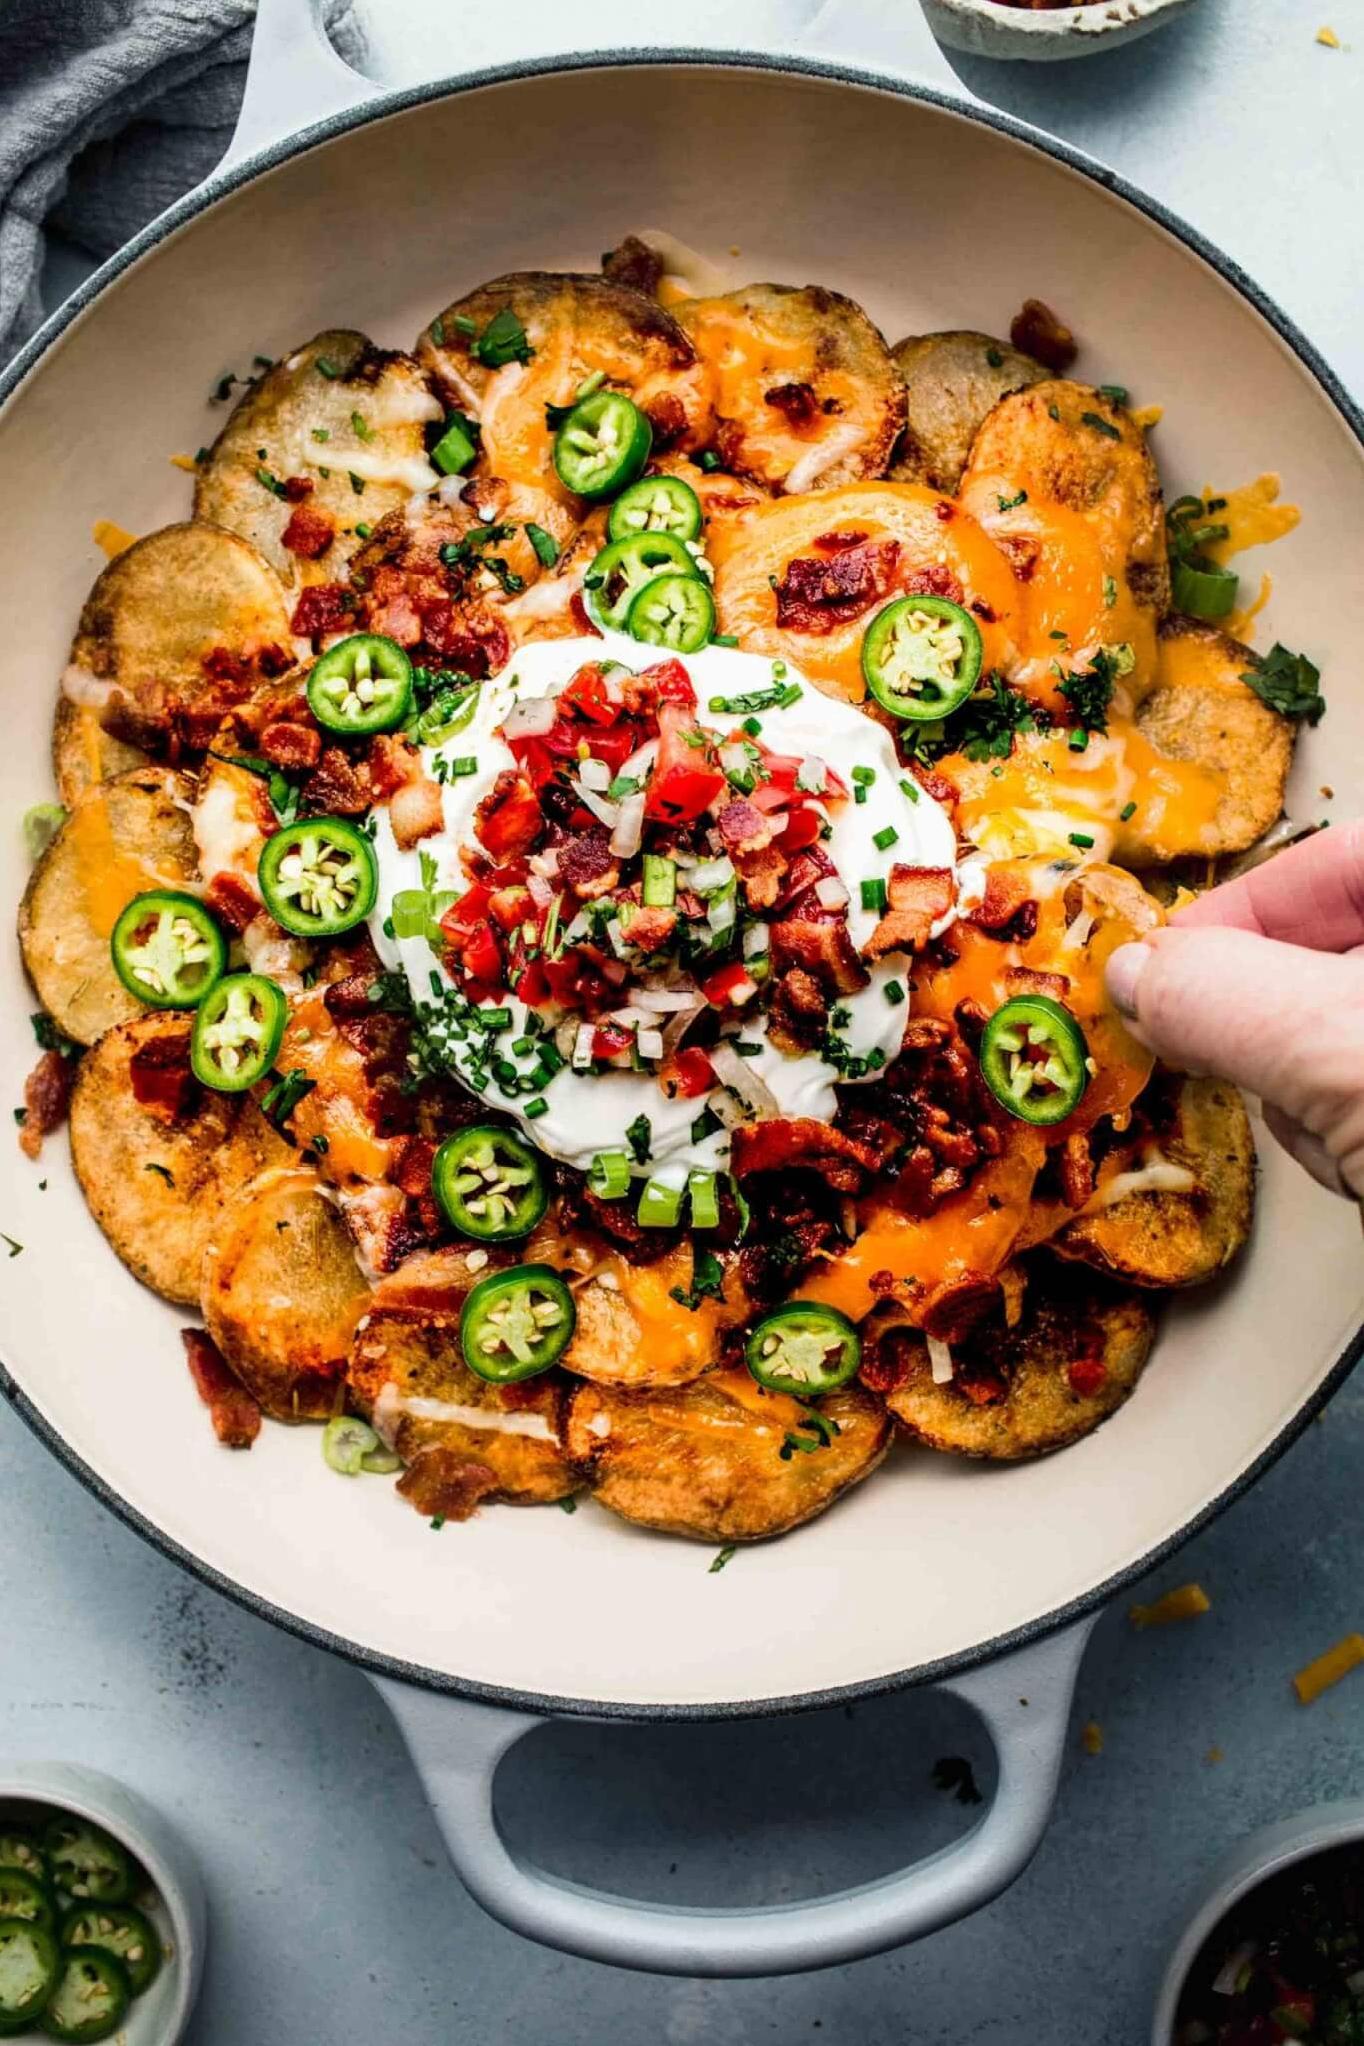  These nachos are so easy to make, even a leprechaun could do it!